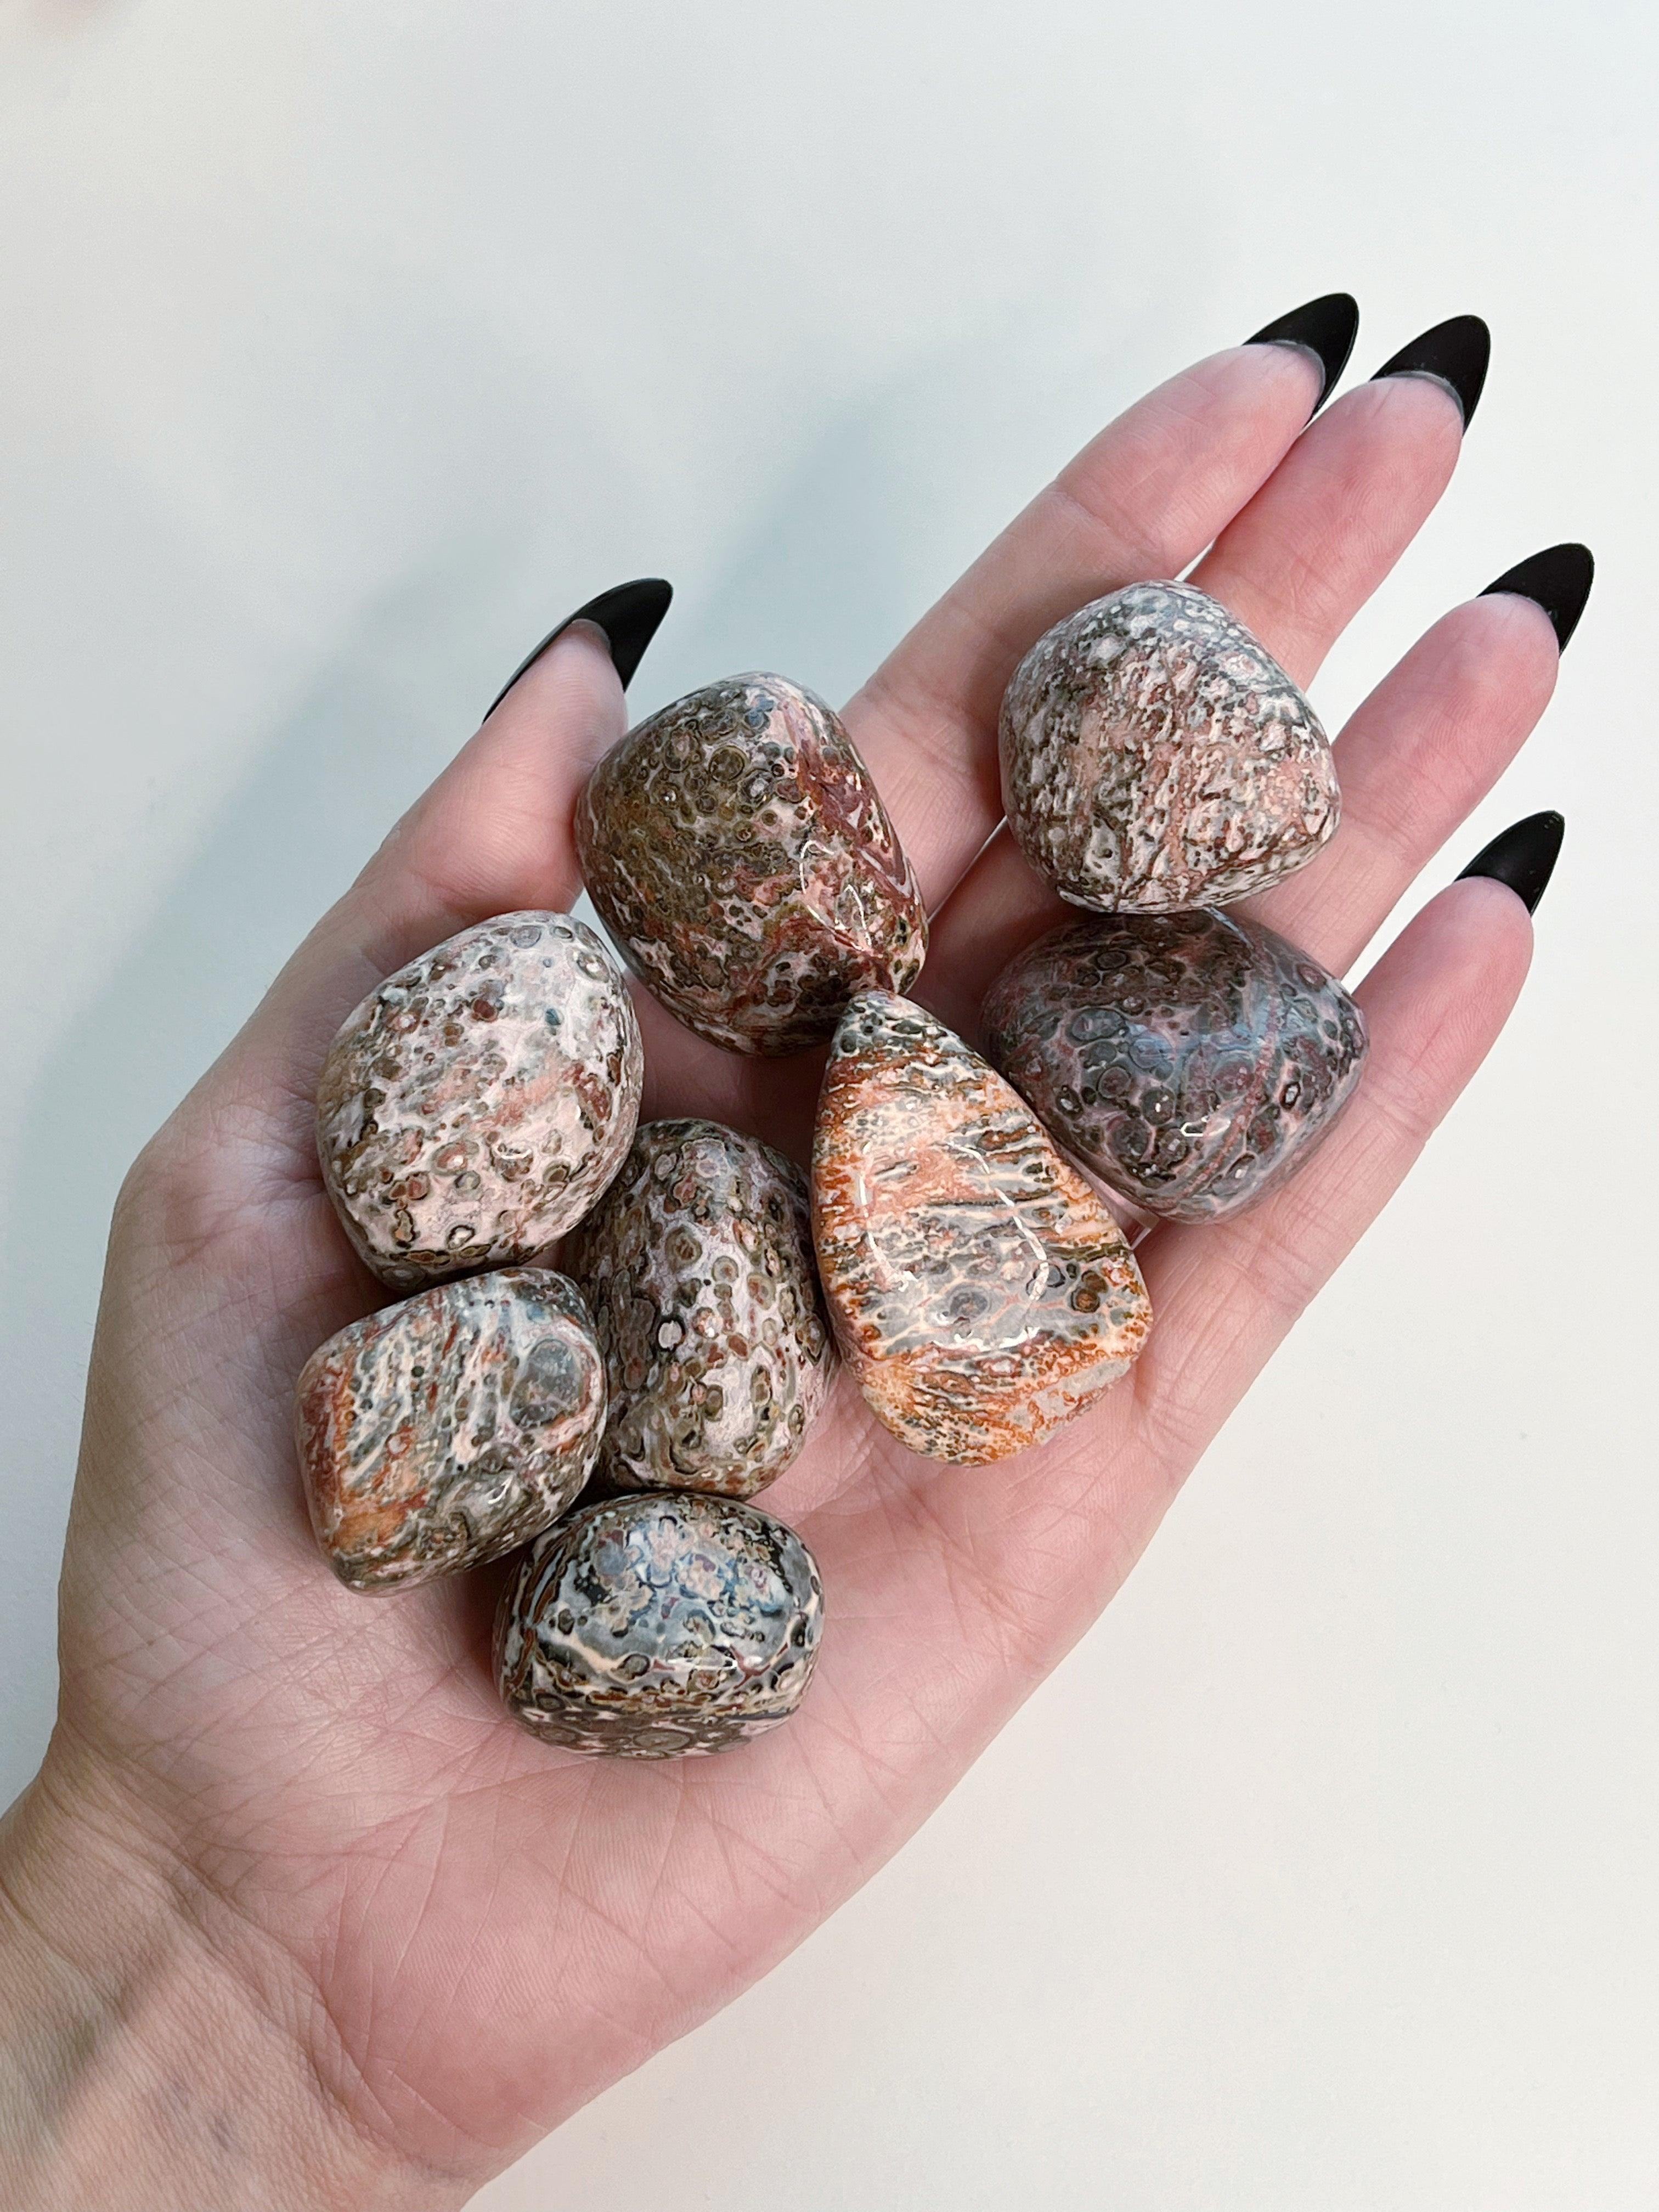 LEOPARDSKIN JASPER CHONK - 33 bday, bulk, connect to animals, emotional support, end of year sale, flash sale, grounding, holiday sale, jasper, leopard, leopardskin, leopardskin jasper, new year sale, old, pocket crystal, protection, stabilizing, stress relief, tumble, tumbled stone, tumbles - The Mineral Maven